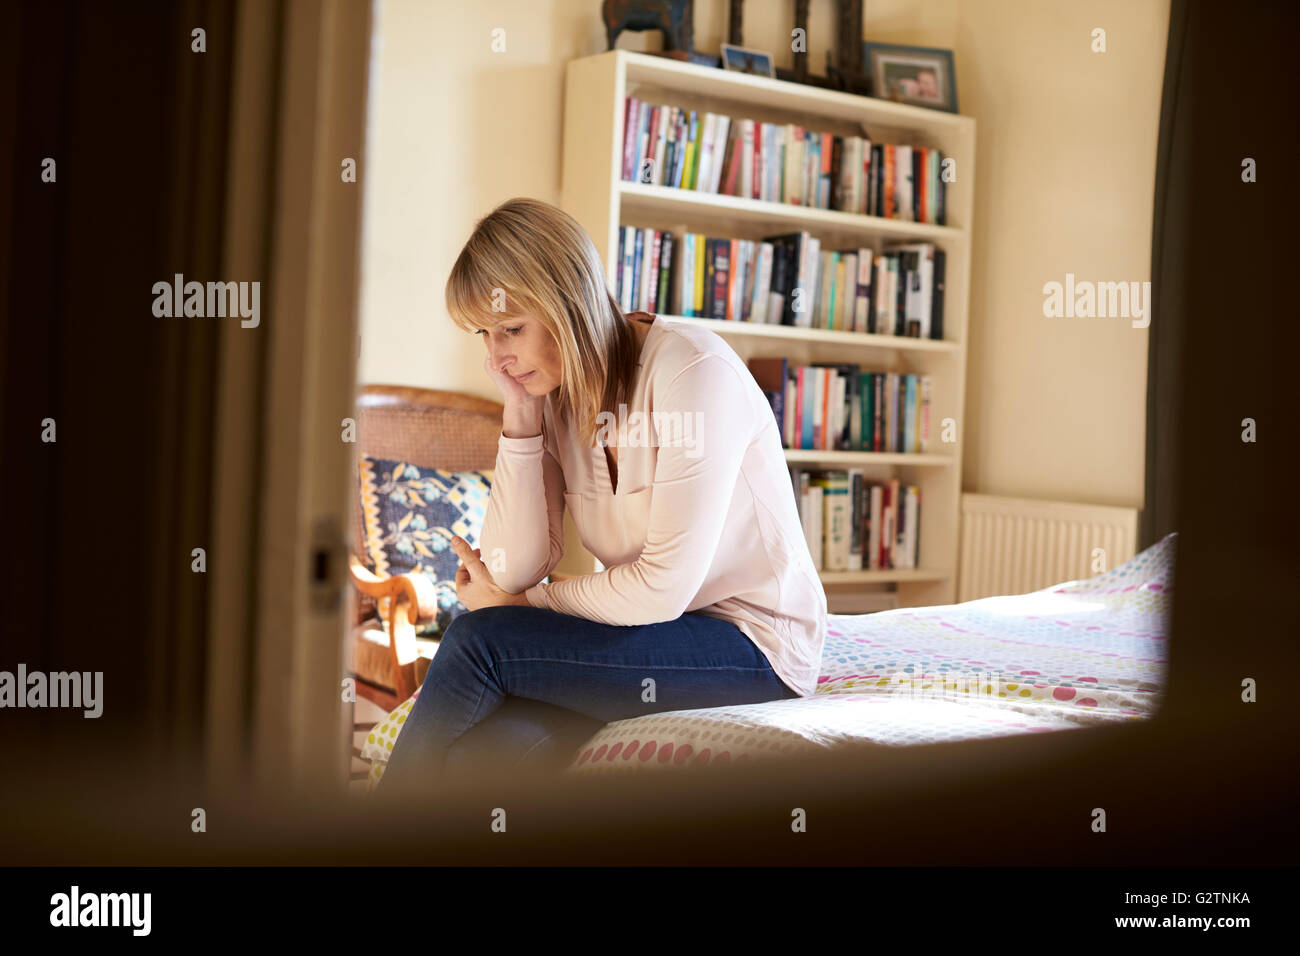 Depressed Mature Woman Sitting On Bed At Home Stock Photo